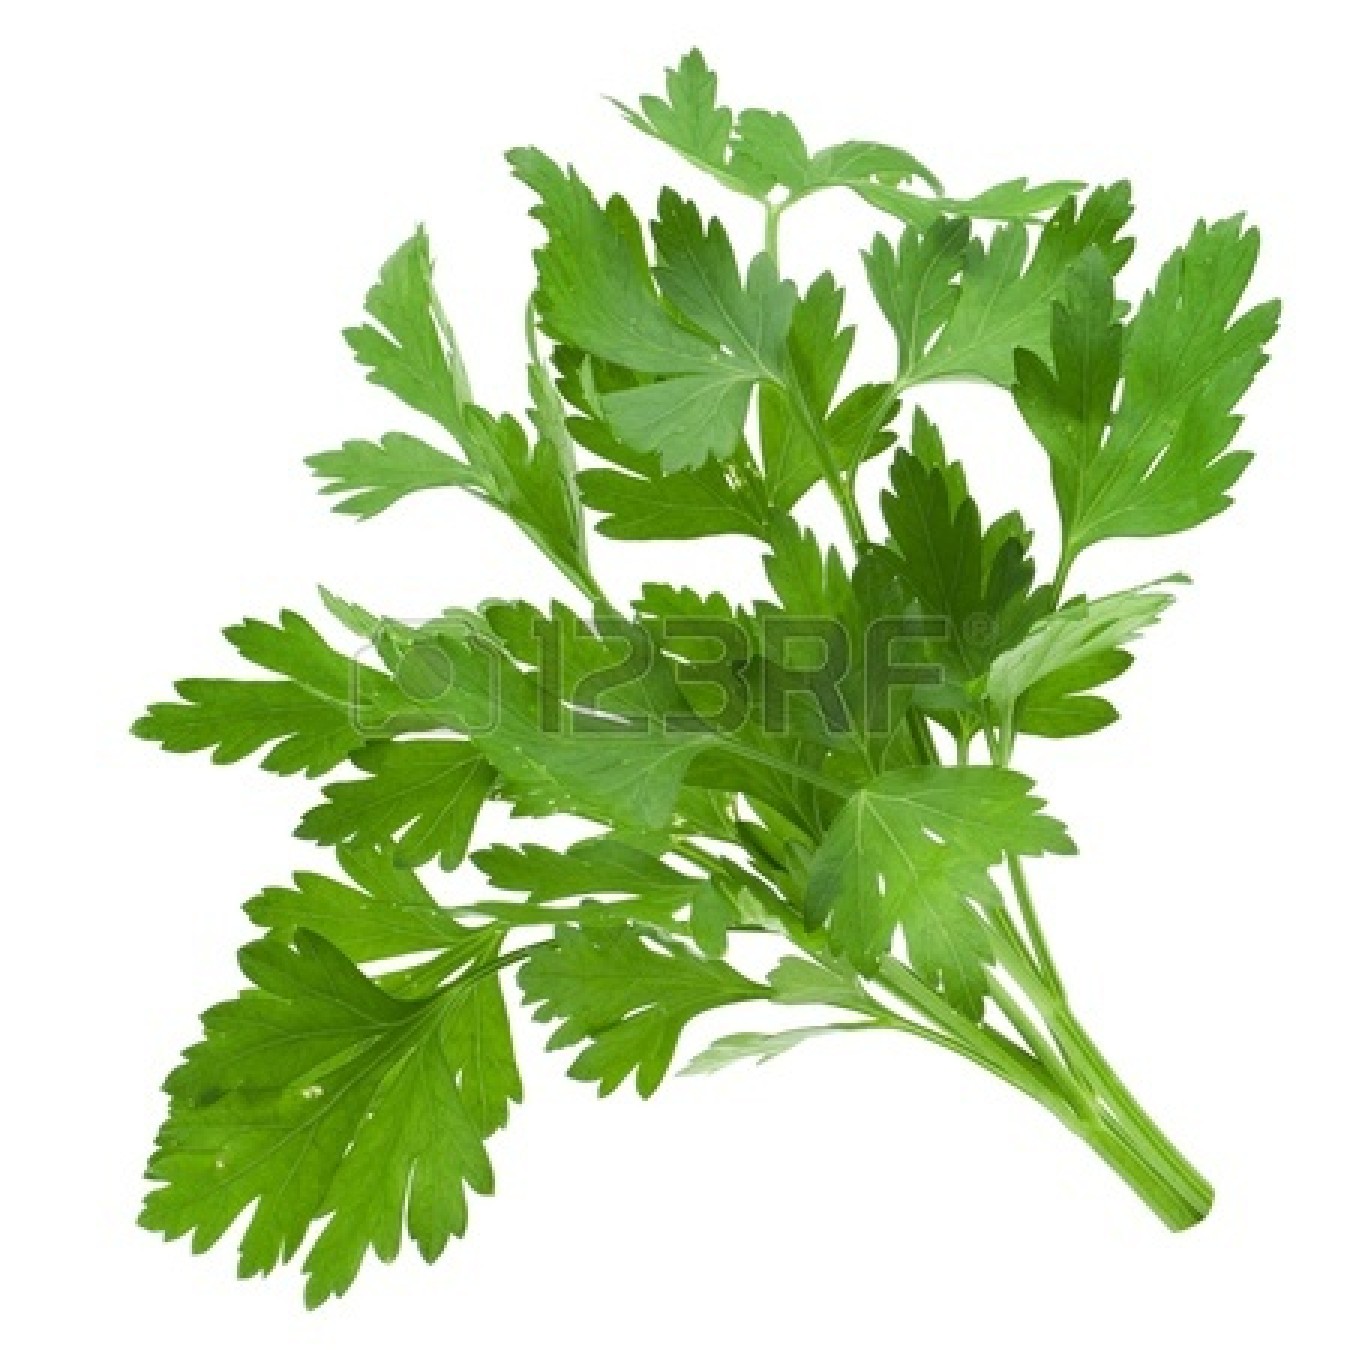 Parsley Clipart 14225279 Parsley Isolated On White Jpg